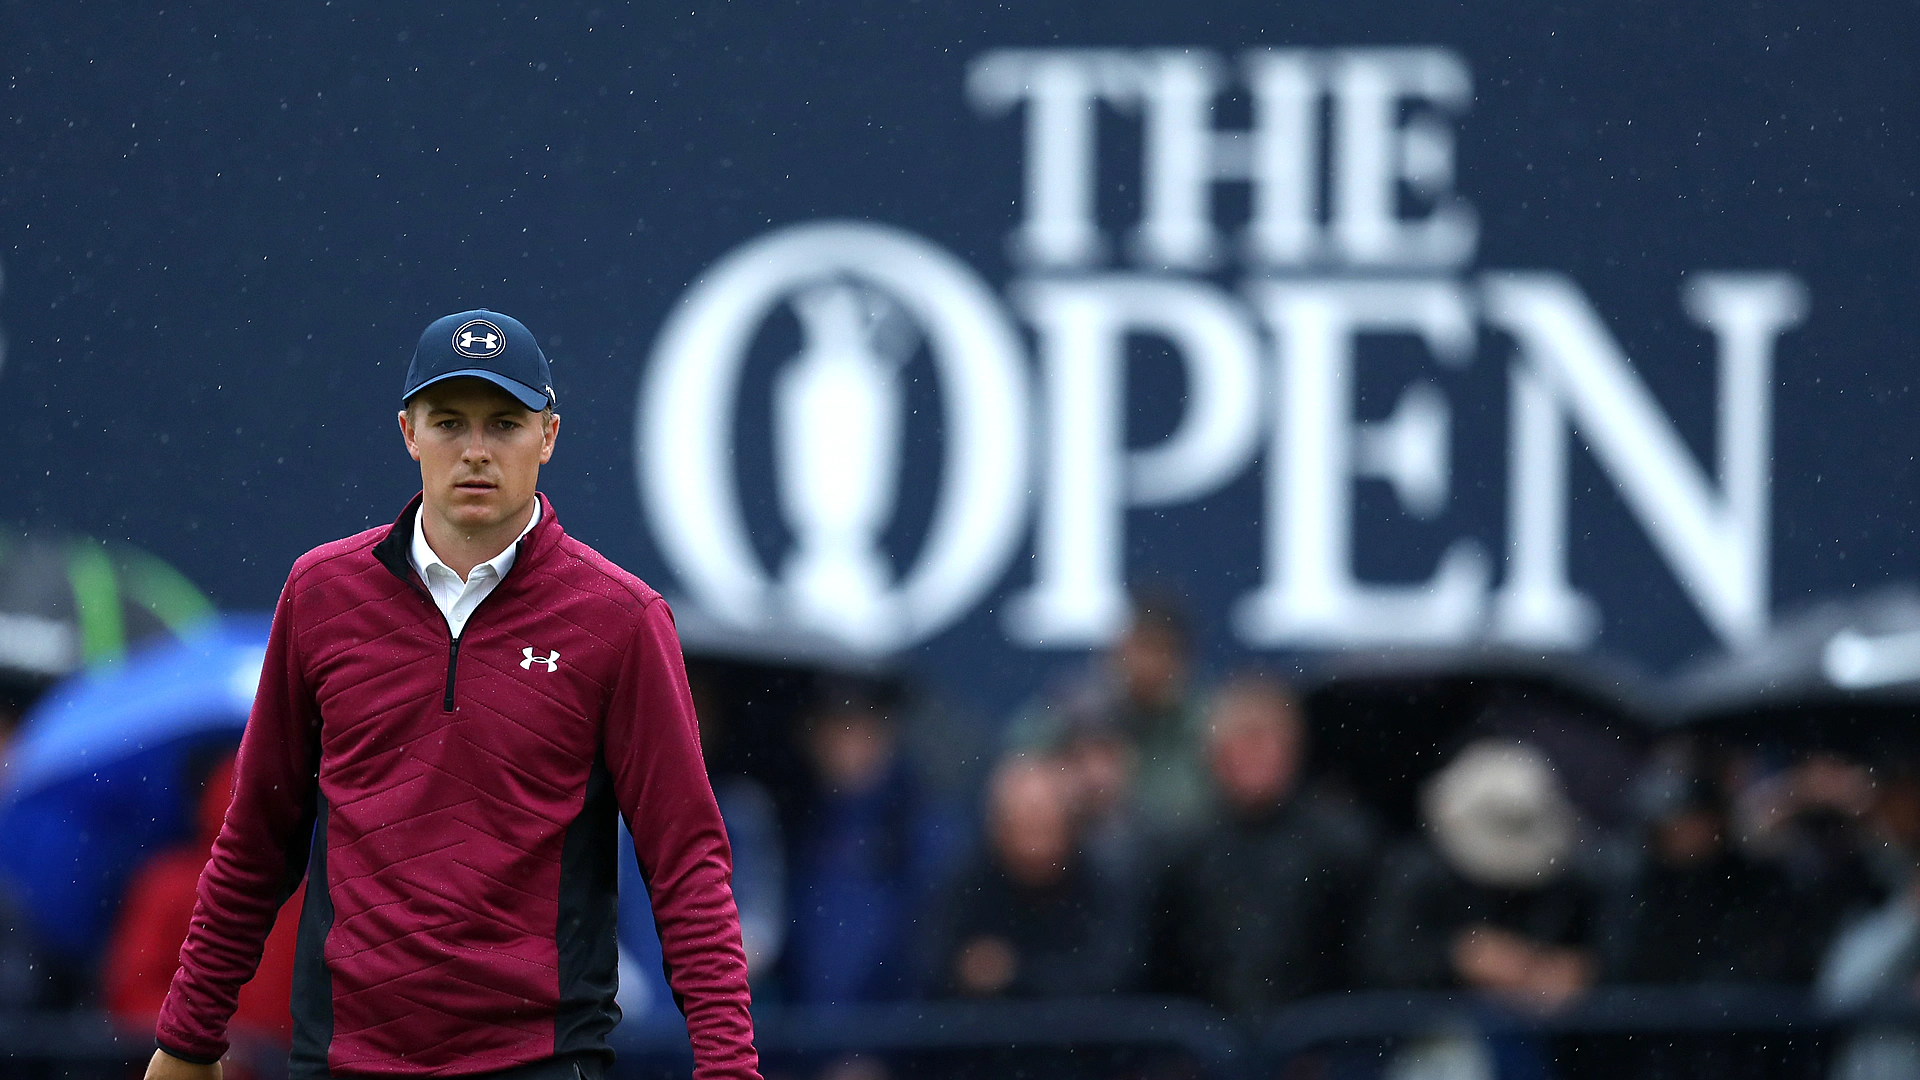 Spieth leads The Open by two over Kuchar